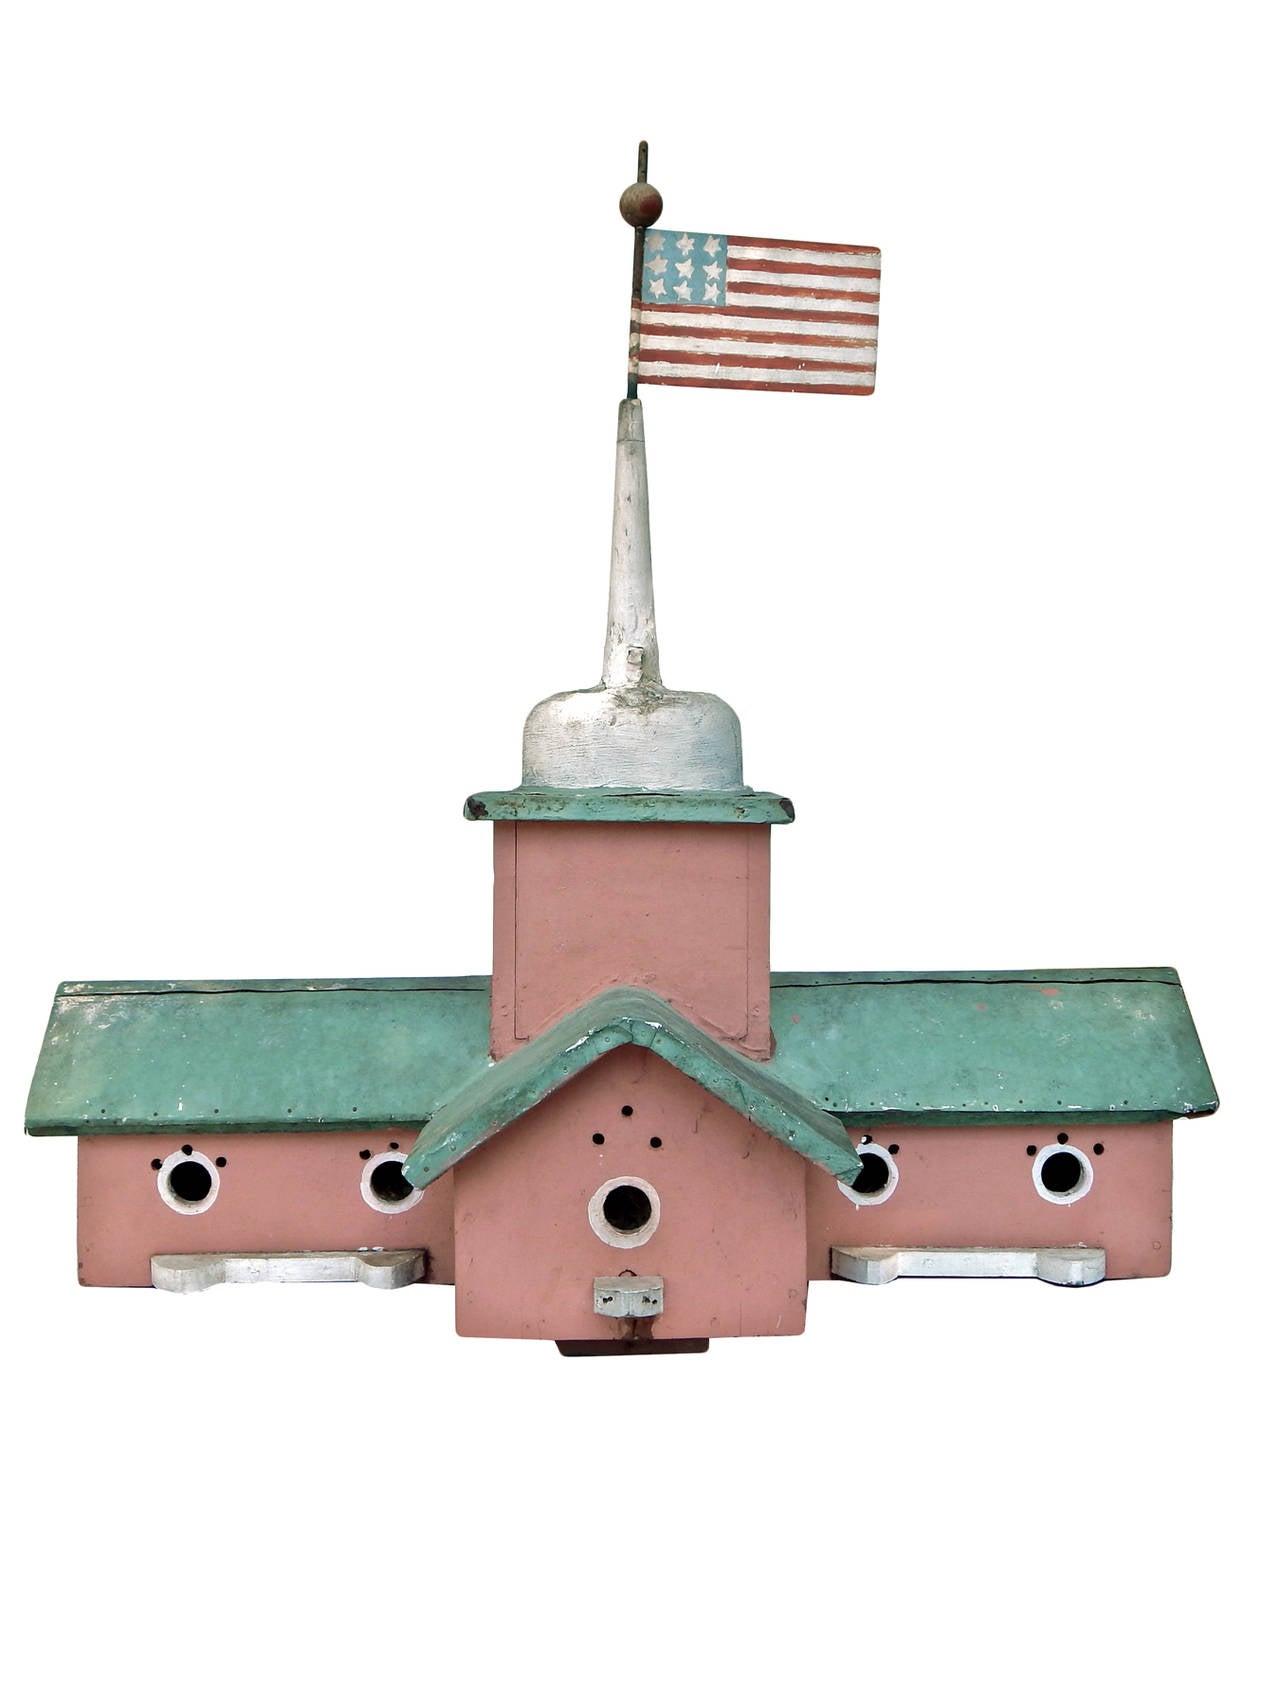 Wonderful Folk Art birdhouse in original faded paint with great age patina.